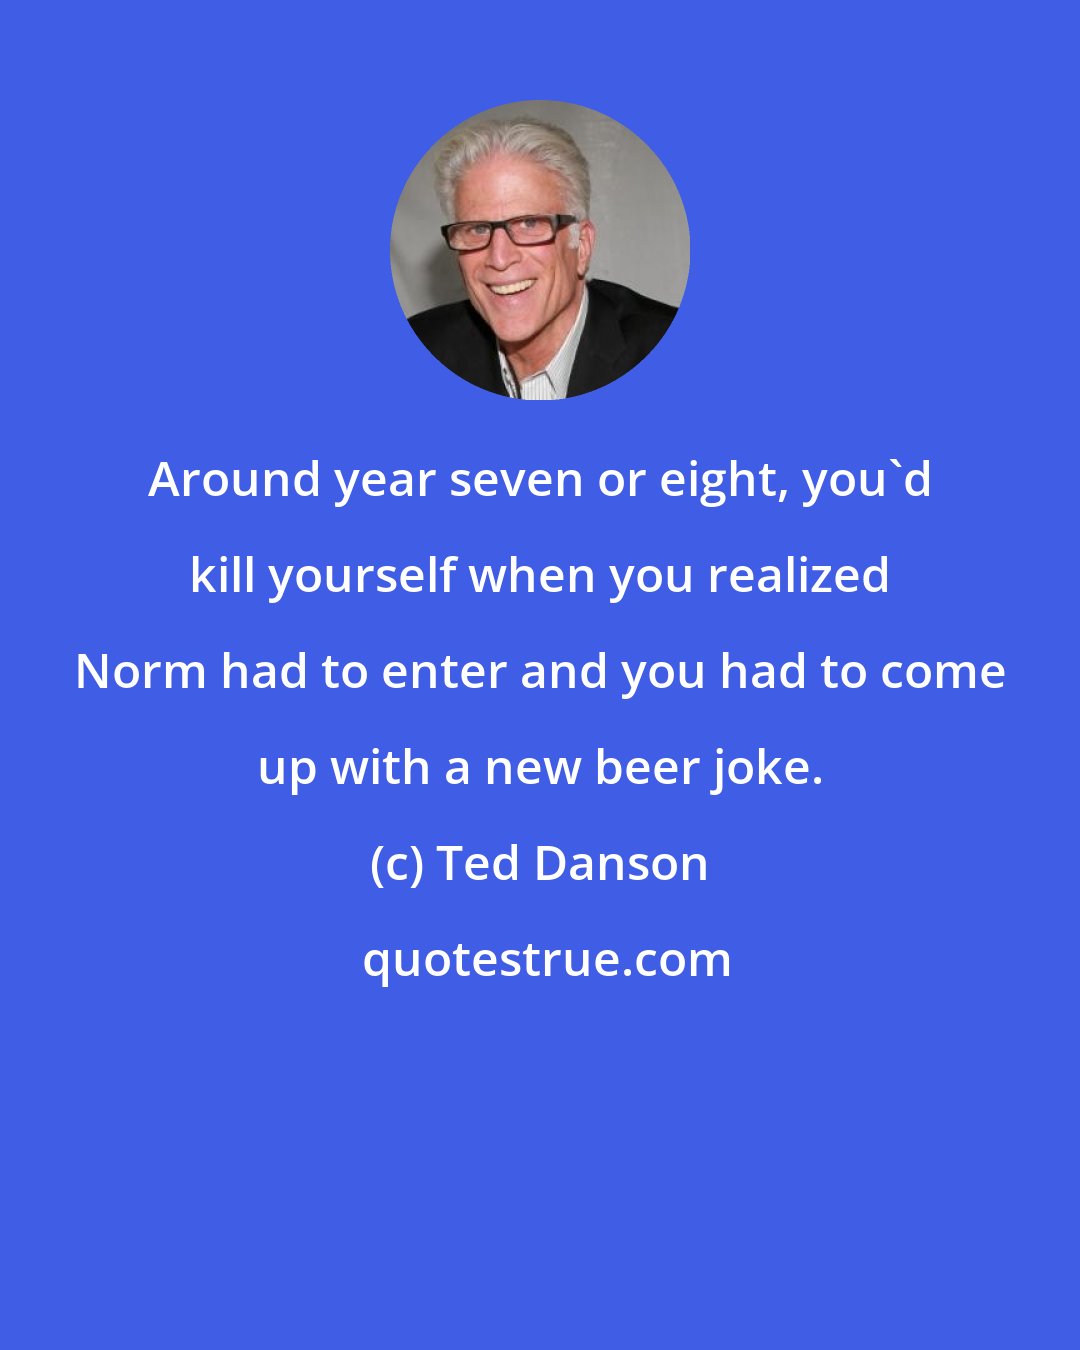 Ted Danson: Around year seven or eight, you'd kill yourself when you realized Norm had to enter and you had to come up with a new beer joke.